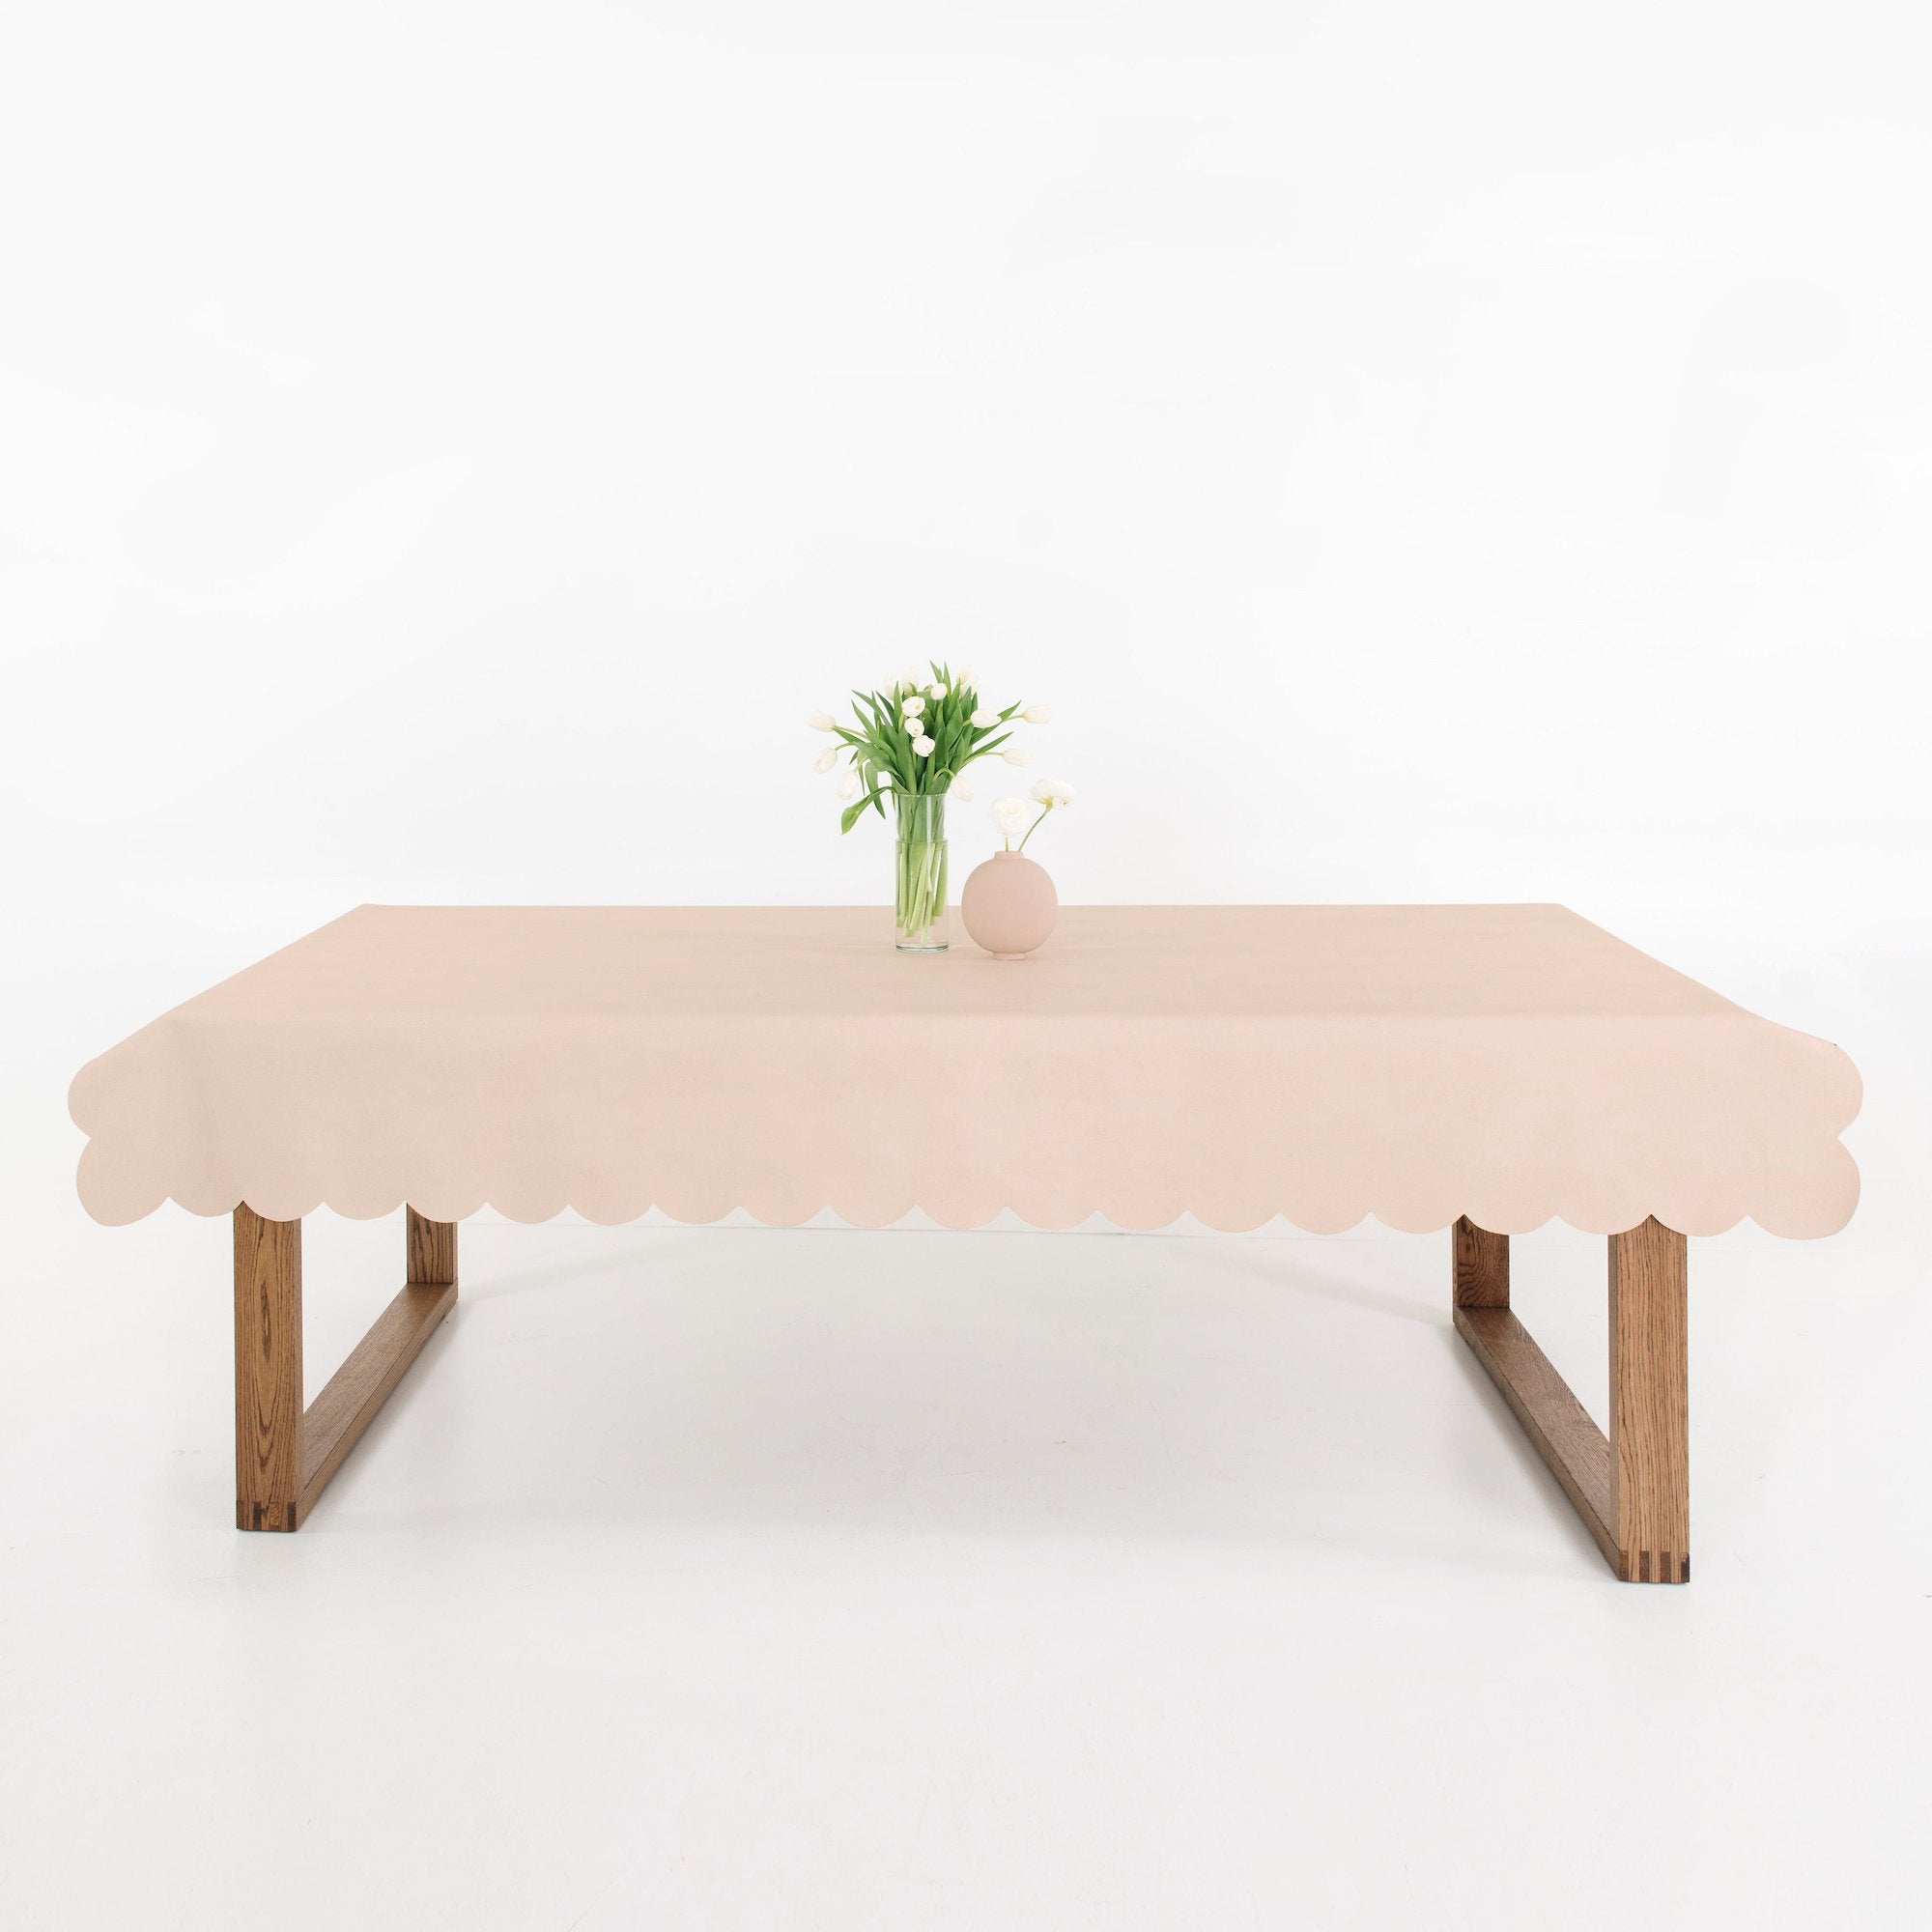 Untanned Scallop (on sale)@Untanned Scallop Tablecloth on dining table